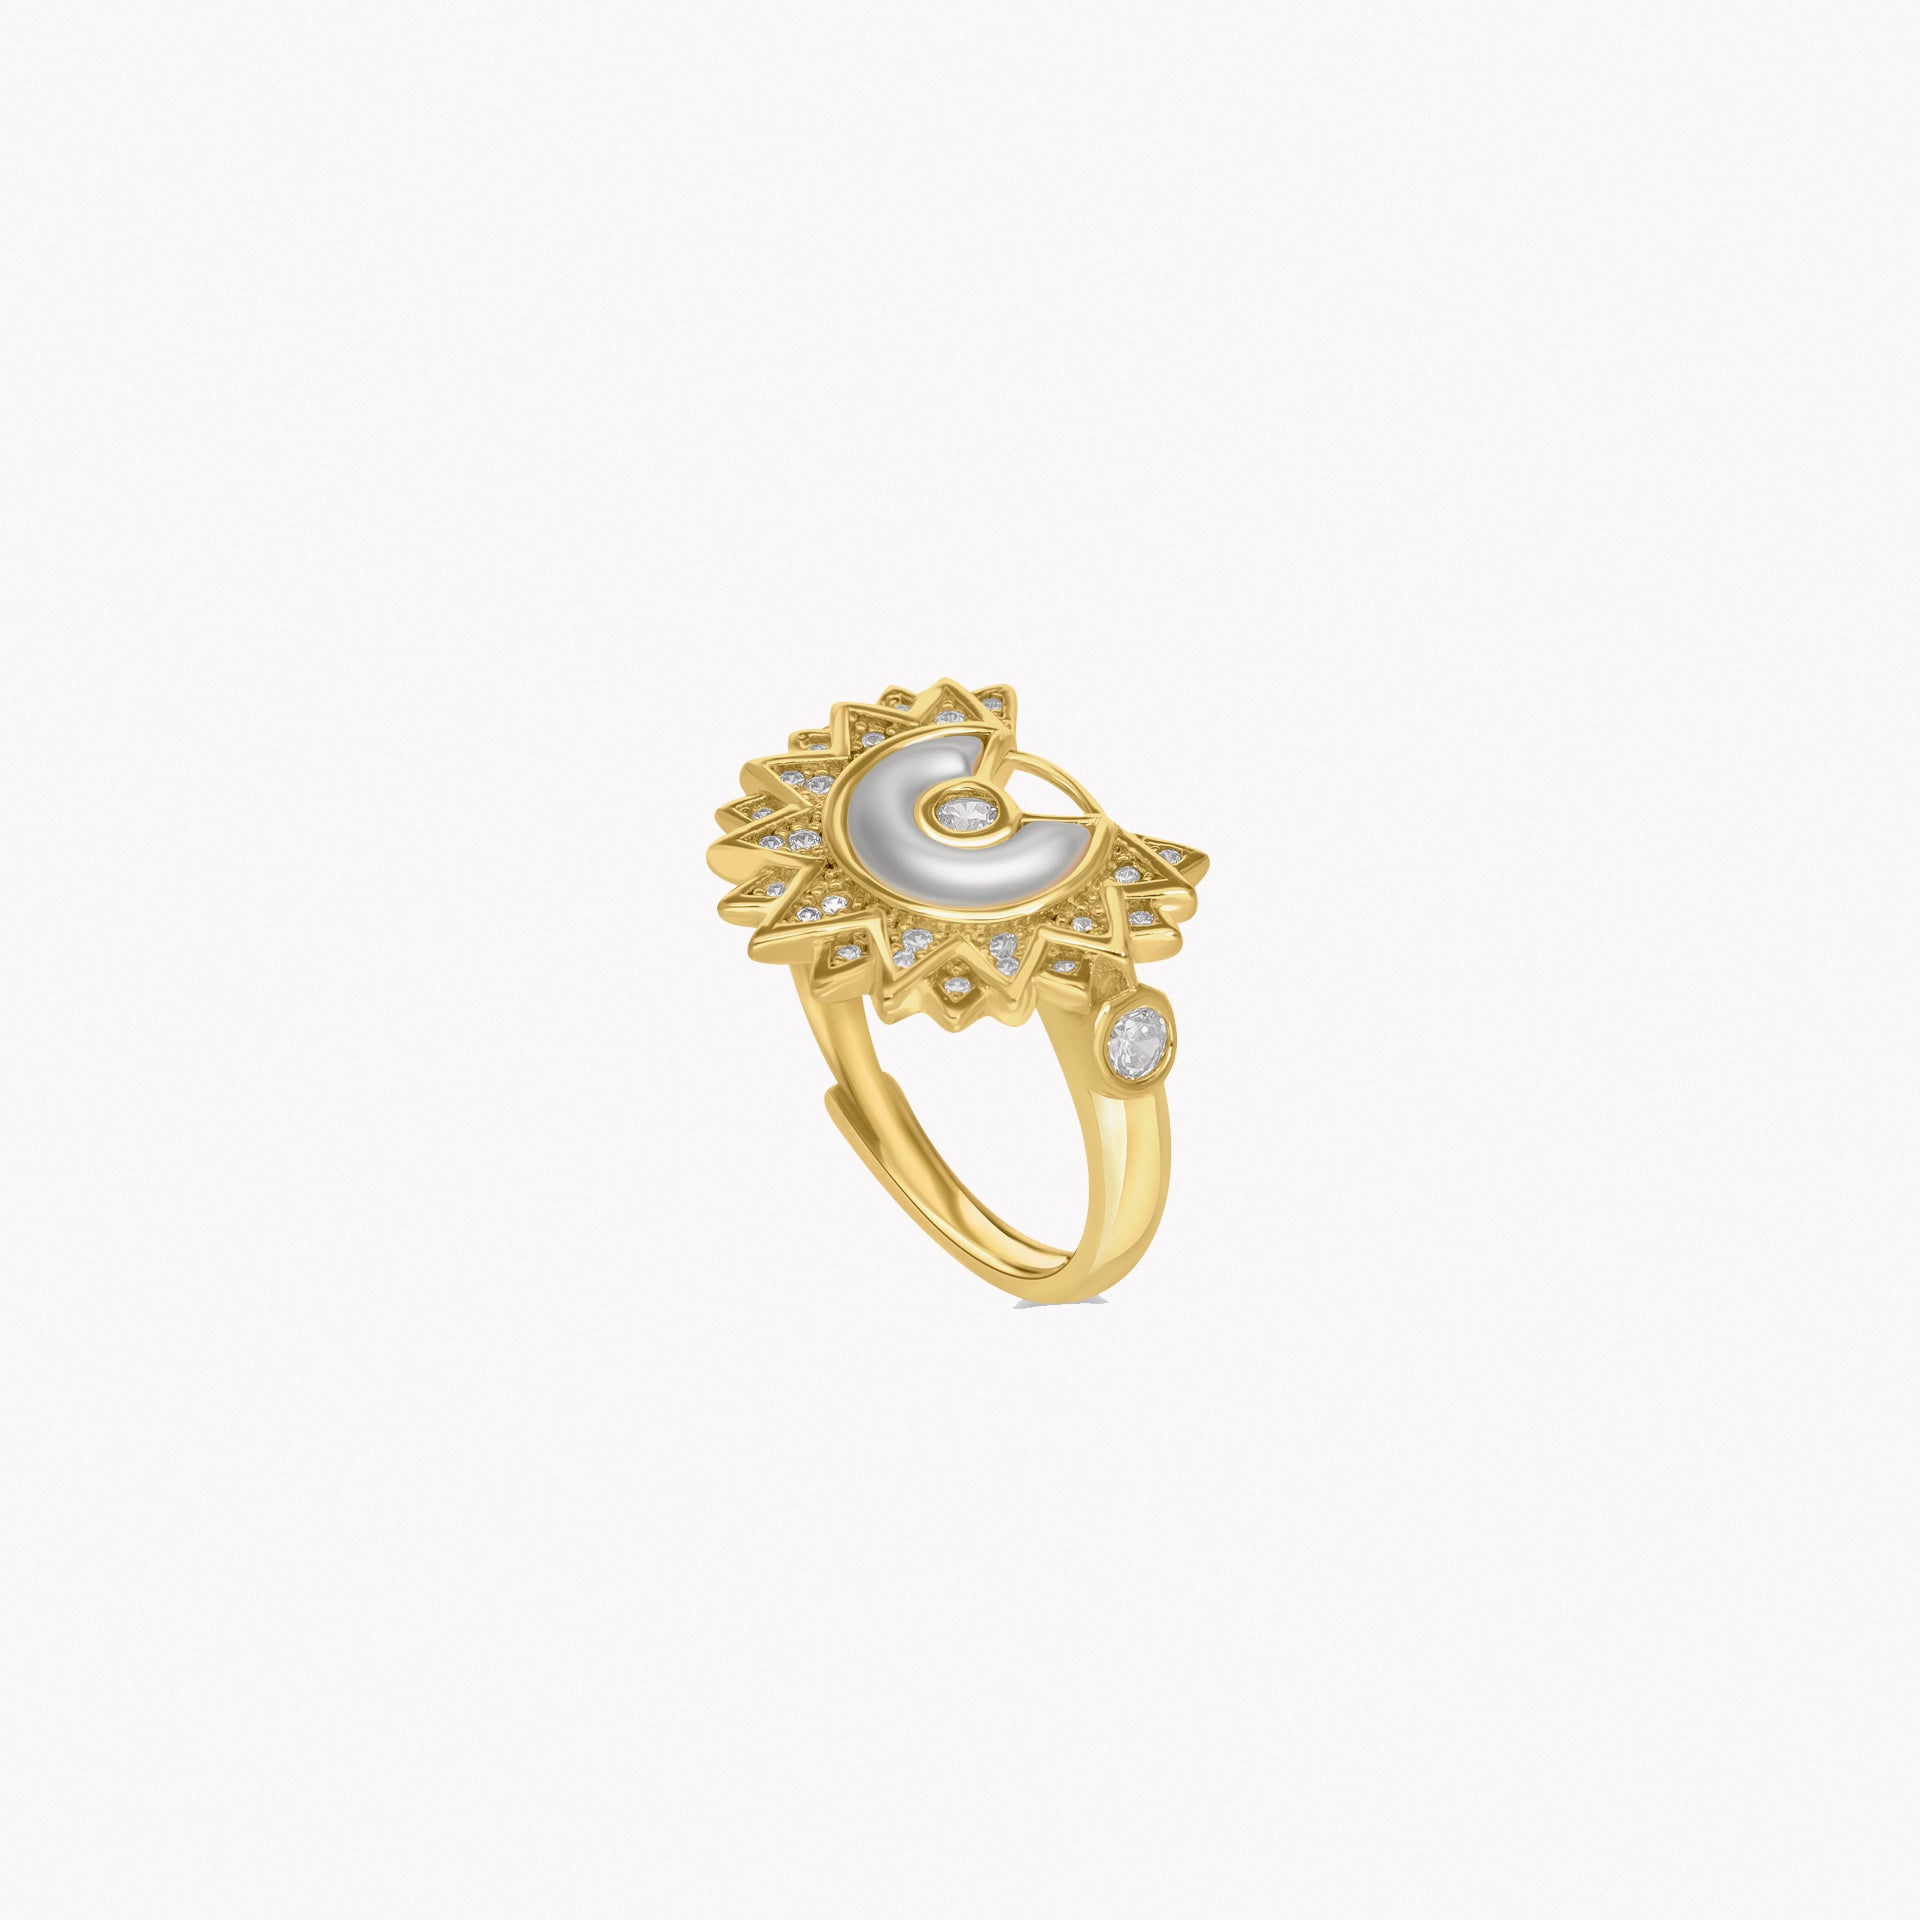 Gold Sunshine Ring From Le-Soleil